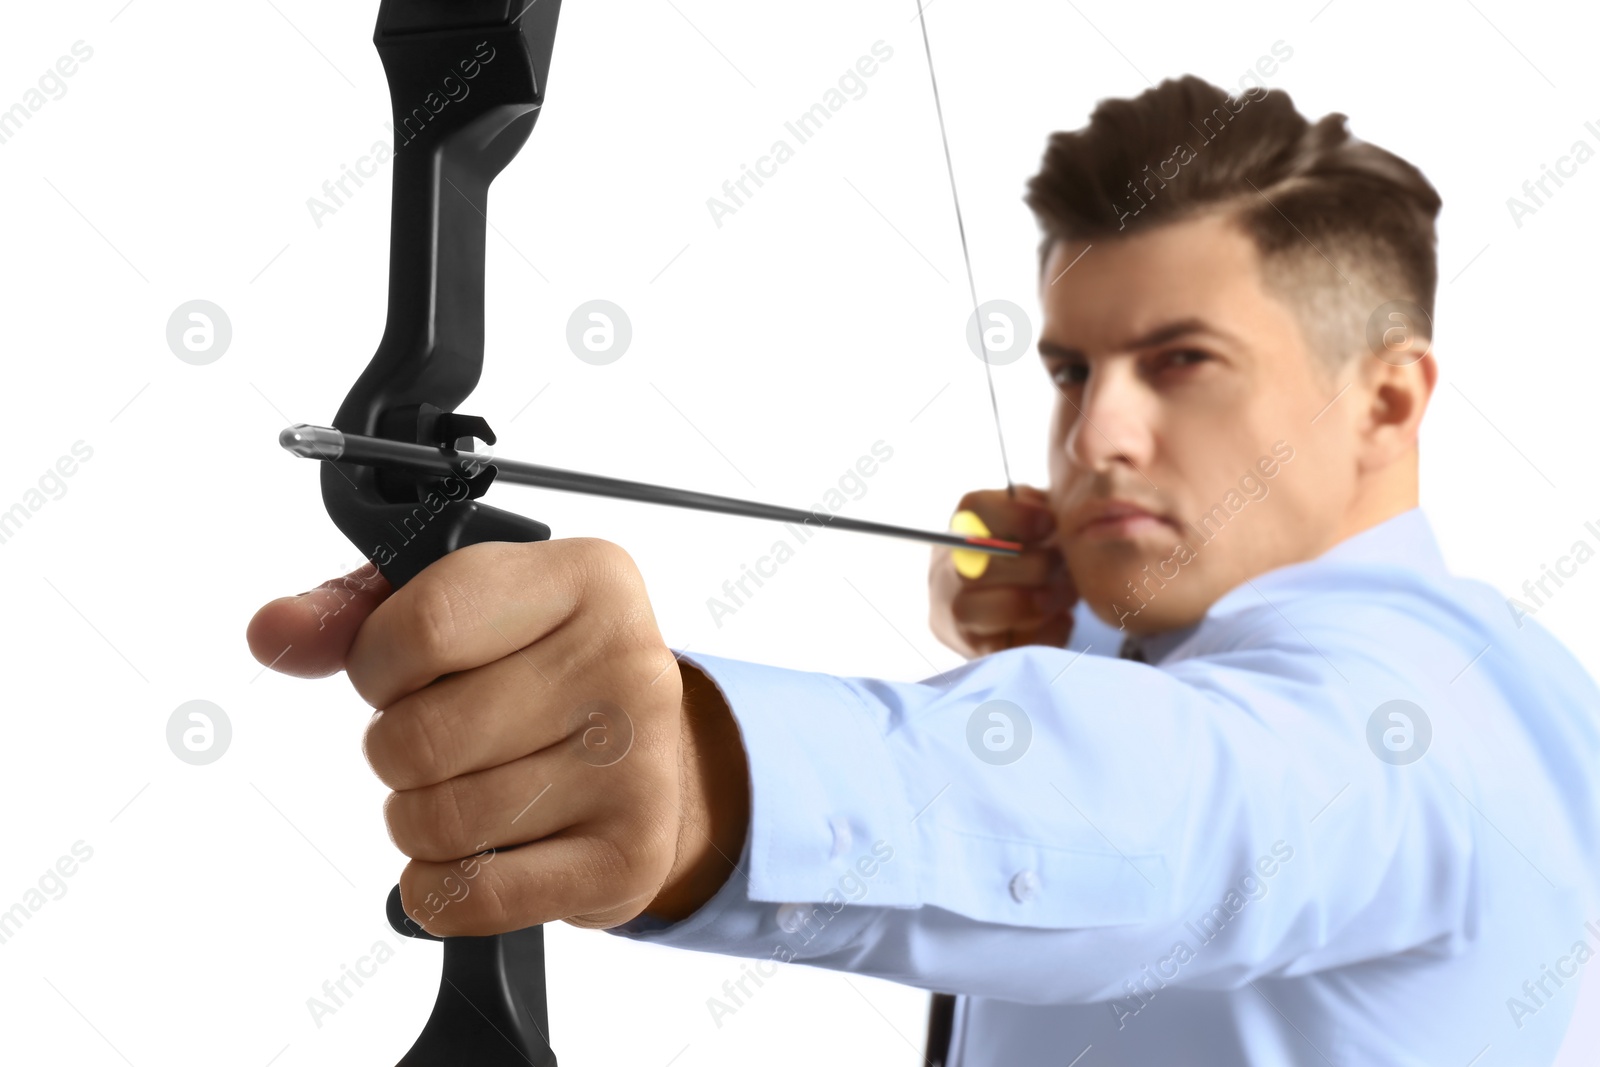 Photo of Businessman with bow and arrow practicing archery against white background, focus on hand